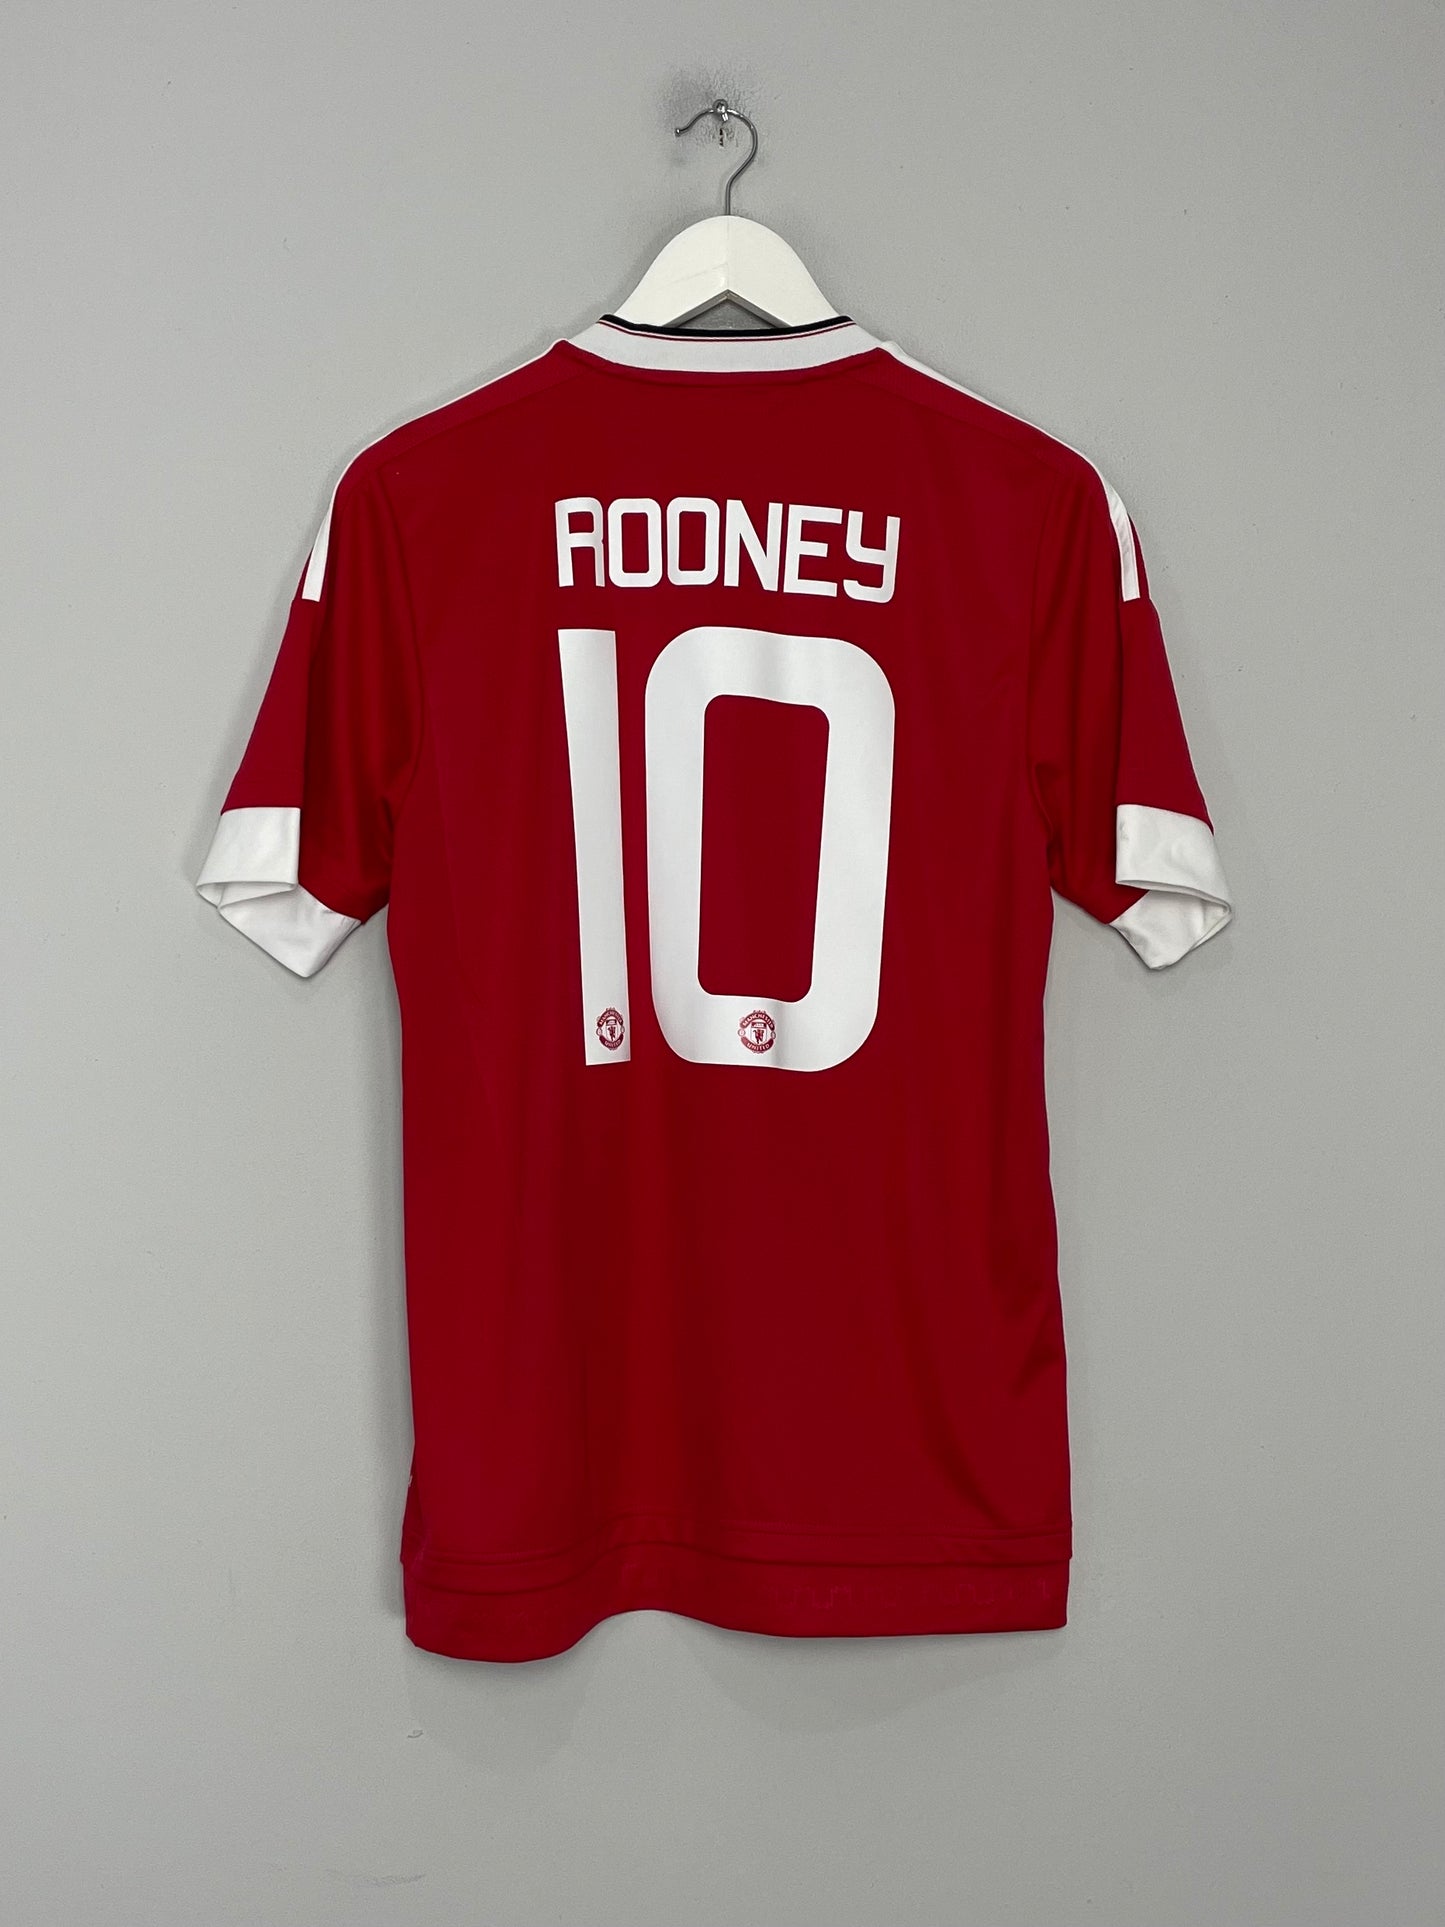 2015/16 MANCHESTER UNITED ROONEY #10 HOME SHIRT (S) ADIDAS